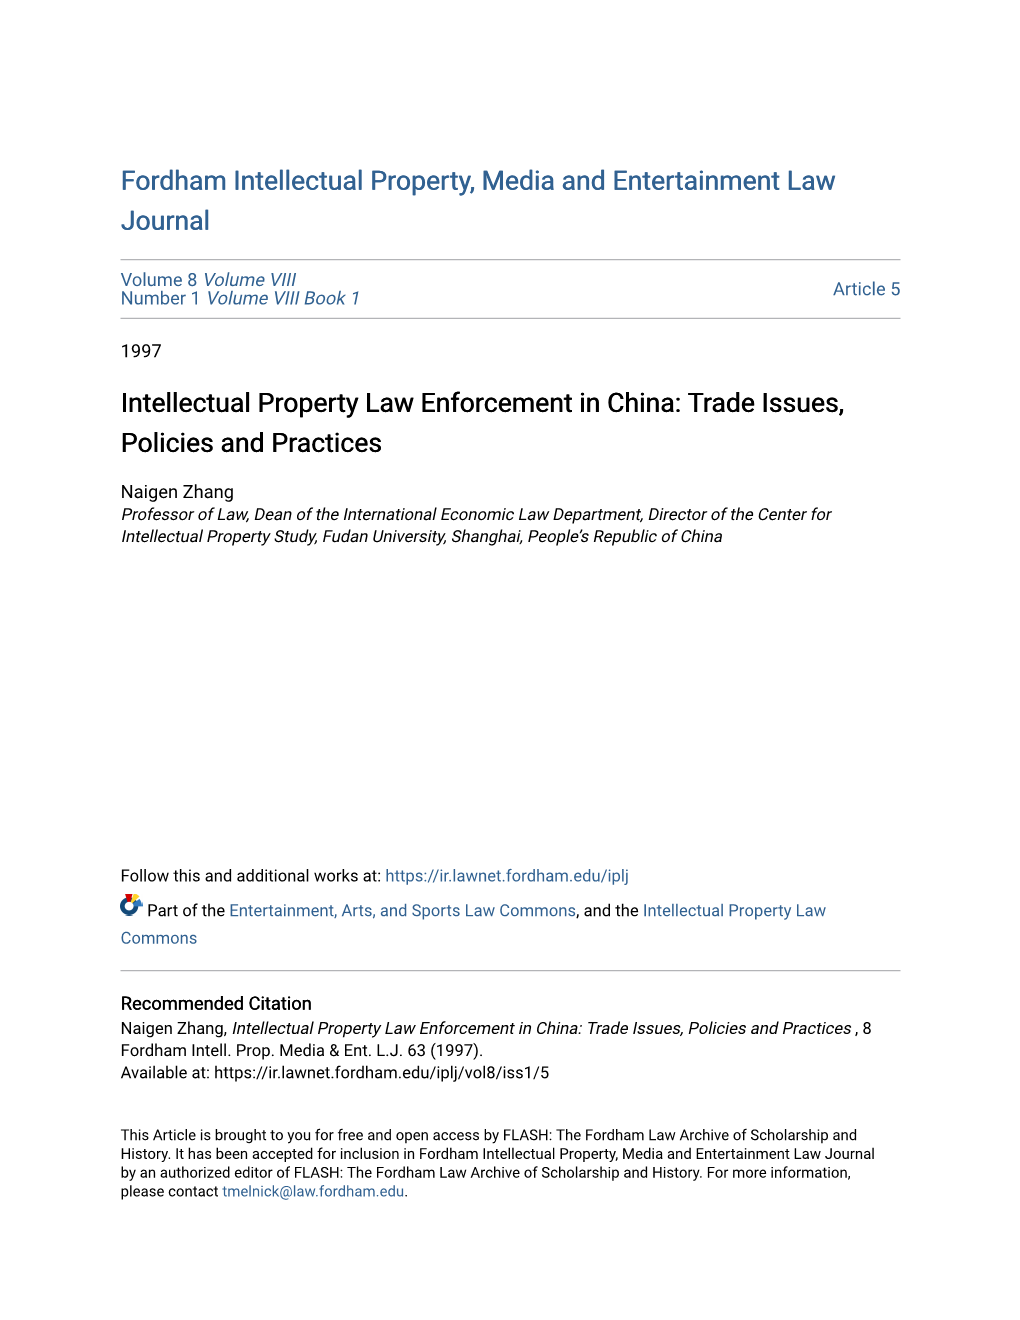 Intellectual Property Law Enforcement in China: Trade Issues, Policies and Practices